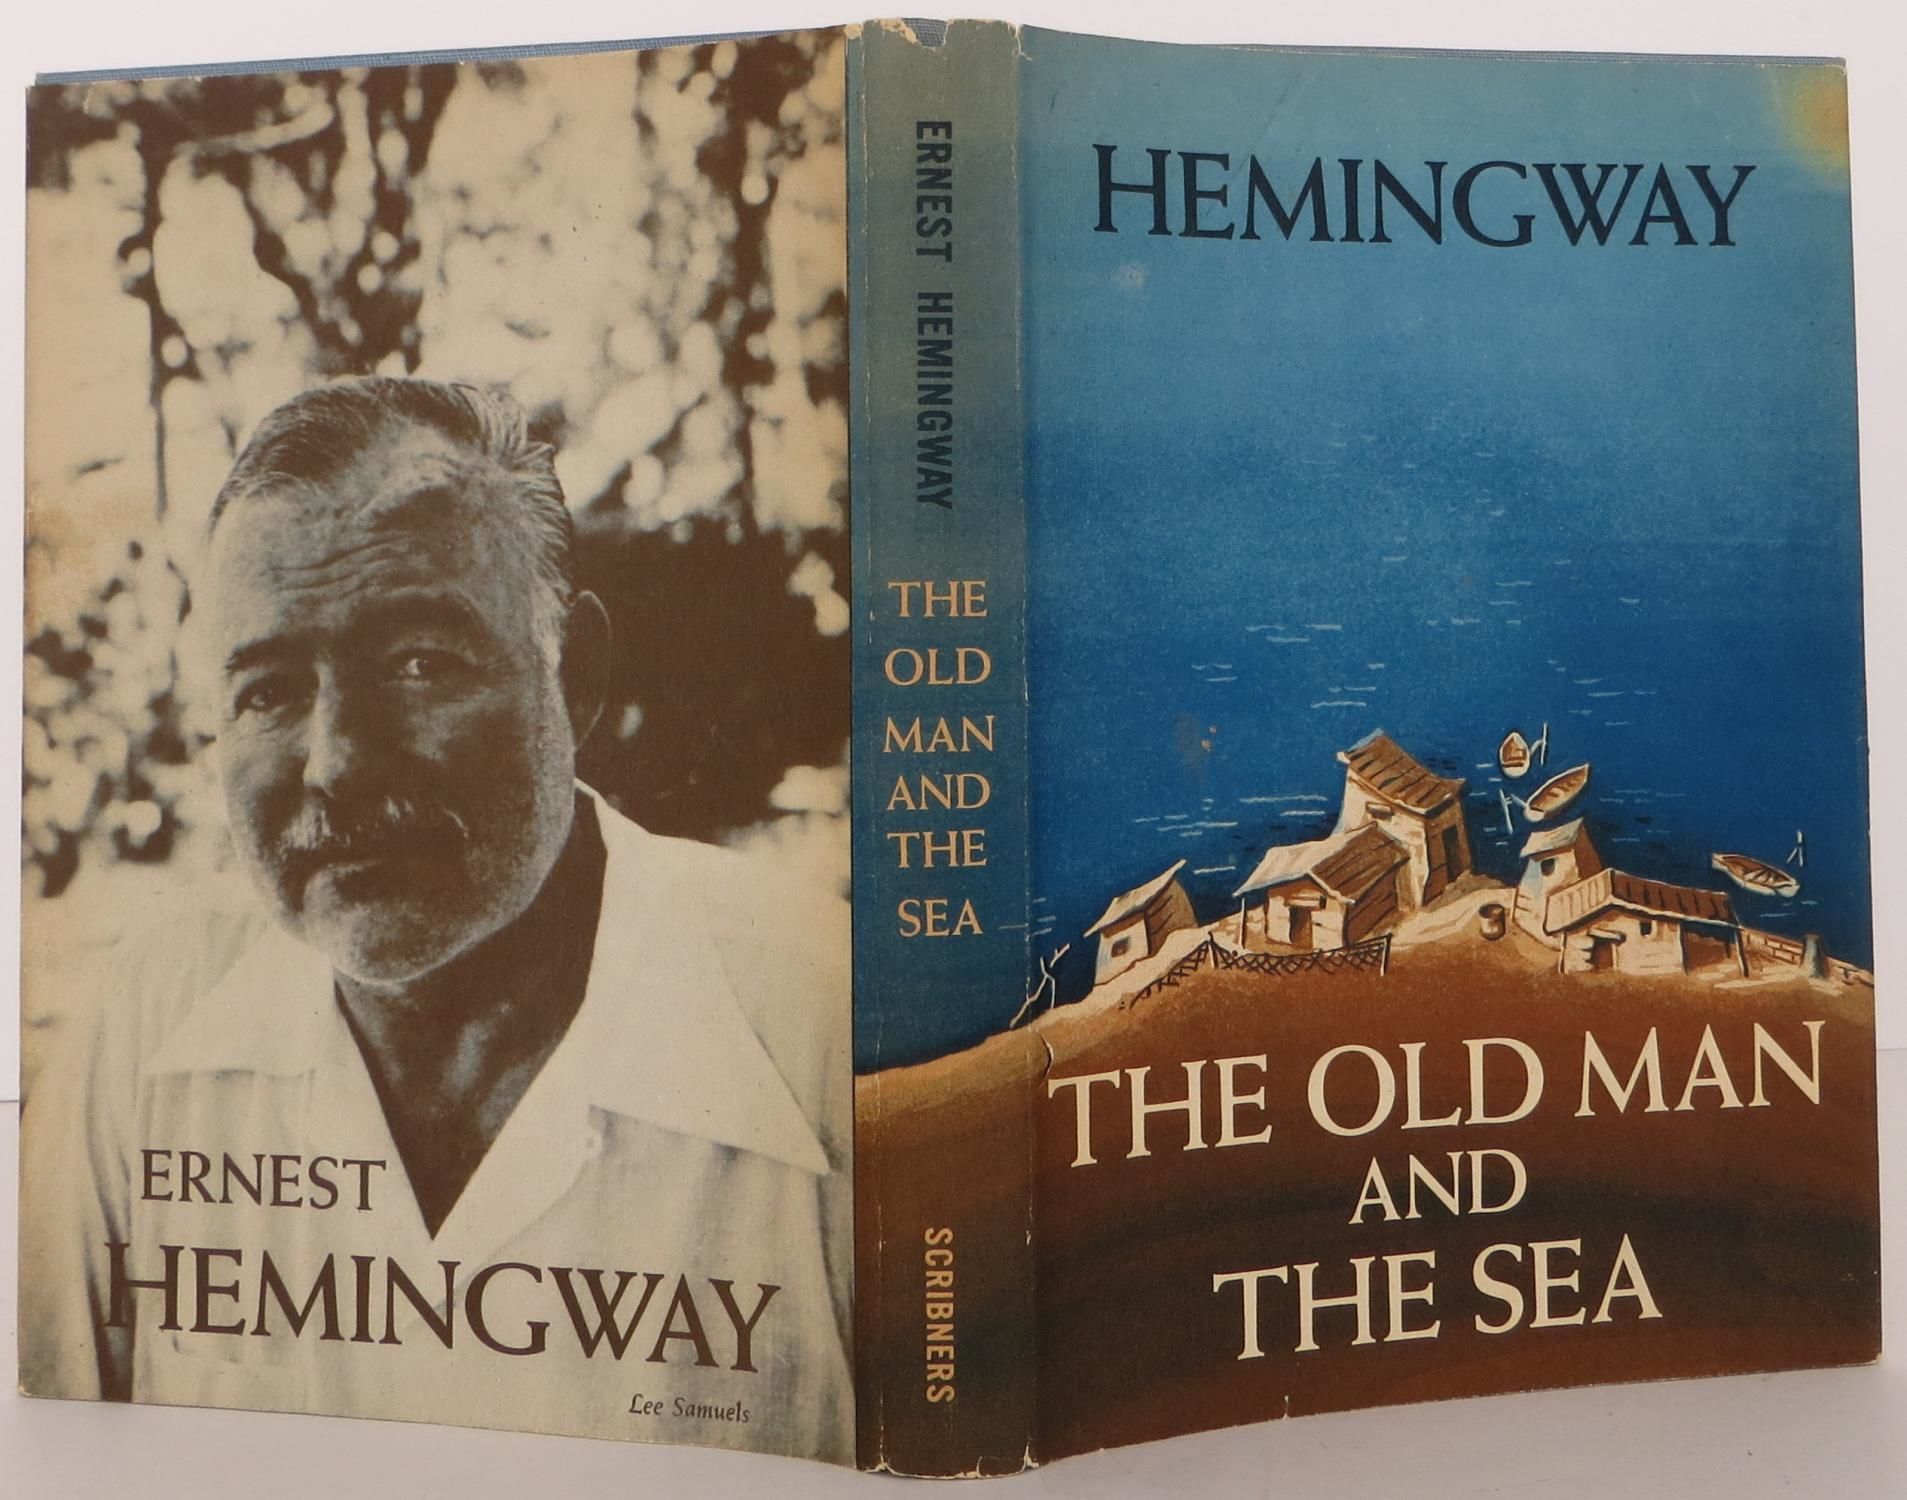 15-enigmatic-facts-about-the-old-man-and-the-sea-ernest-hemingway